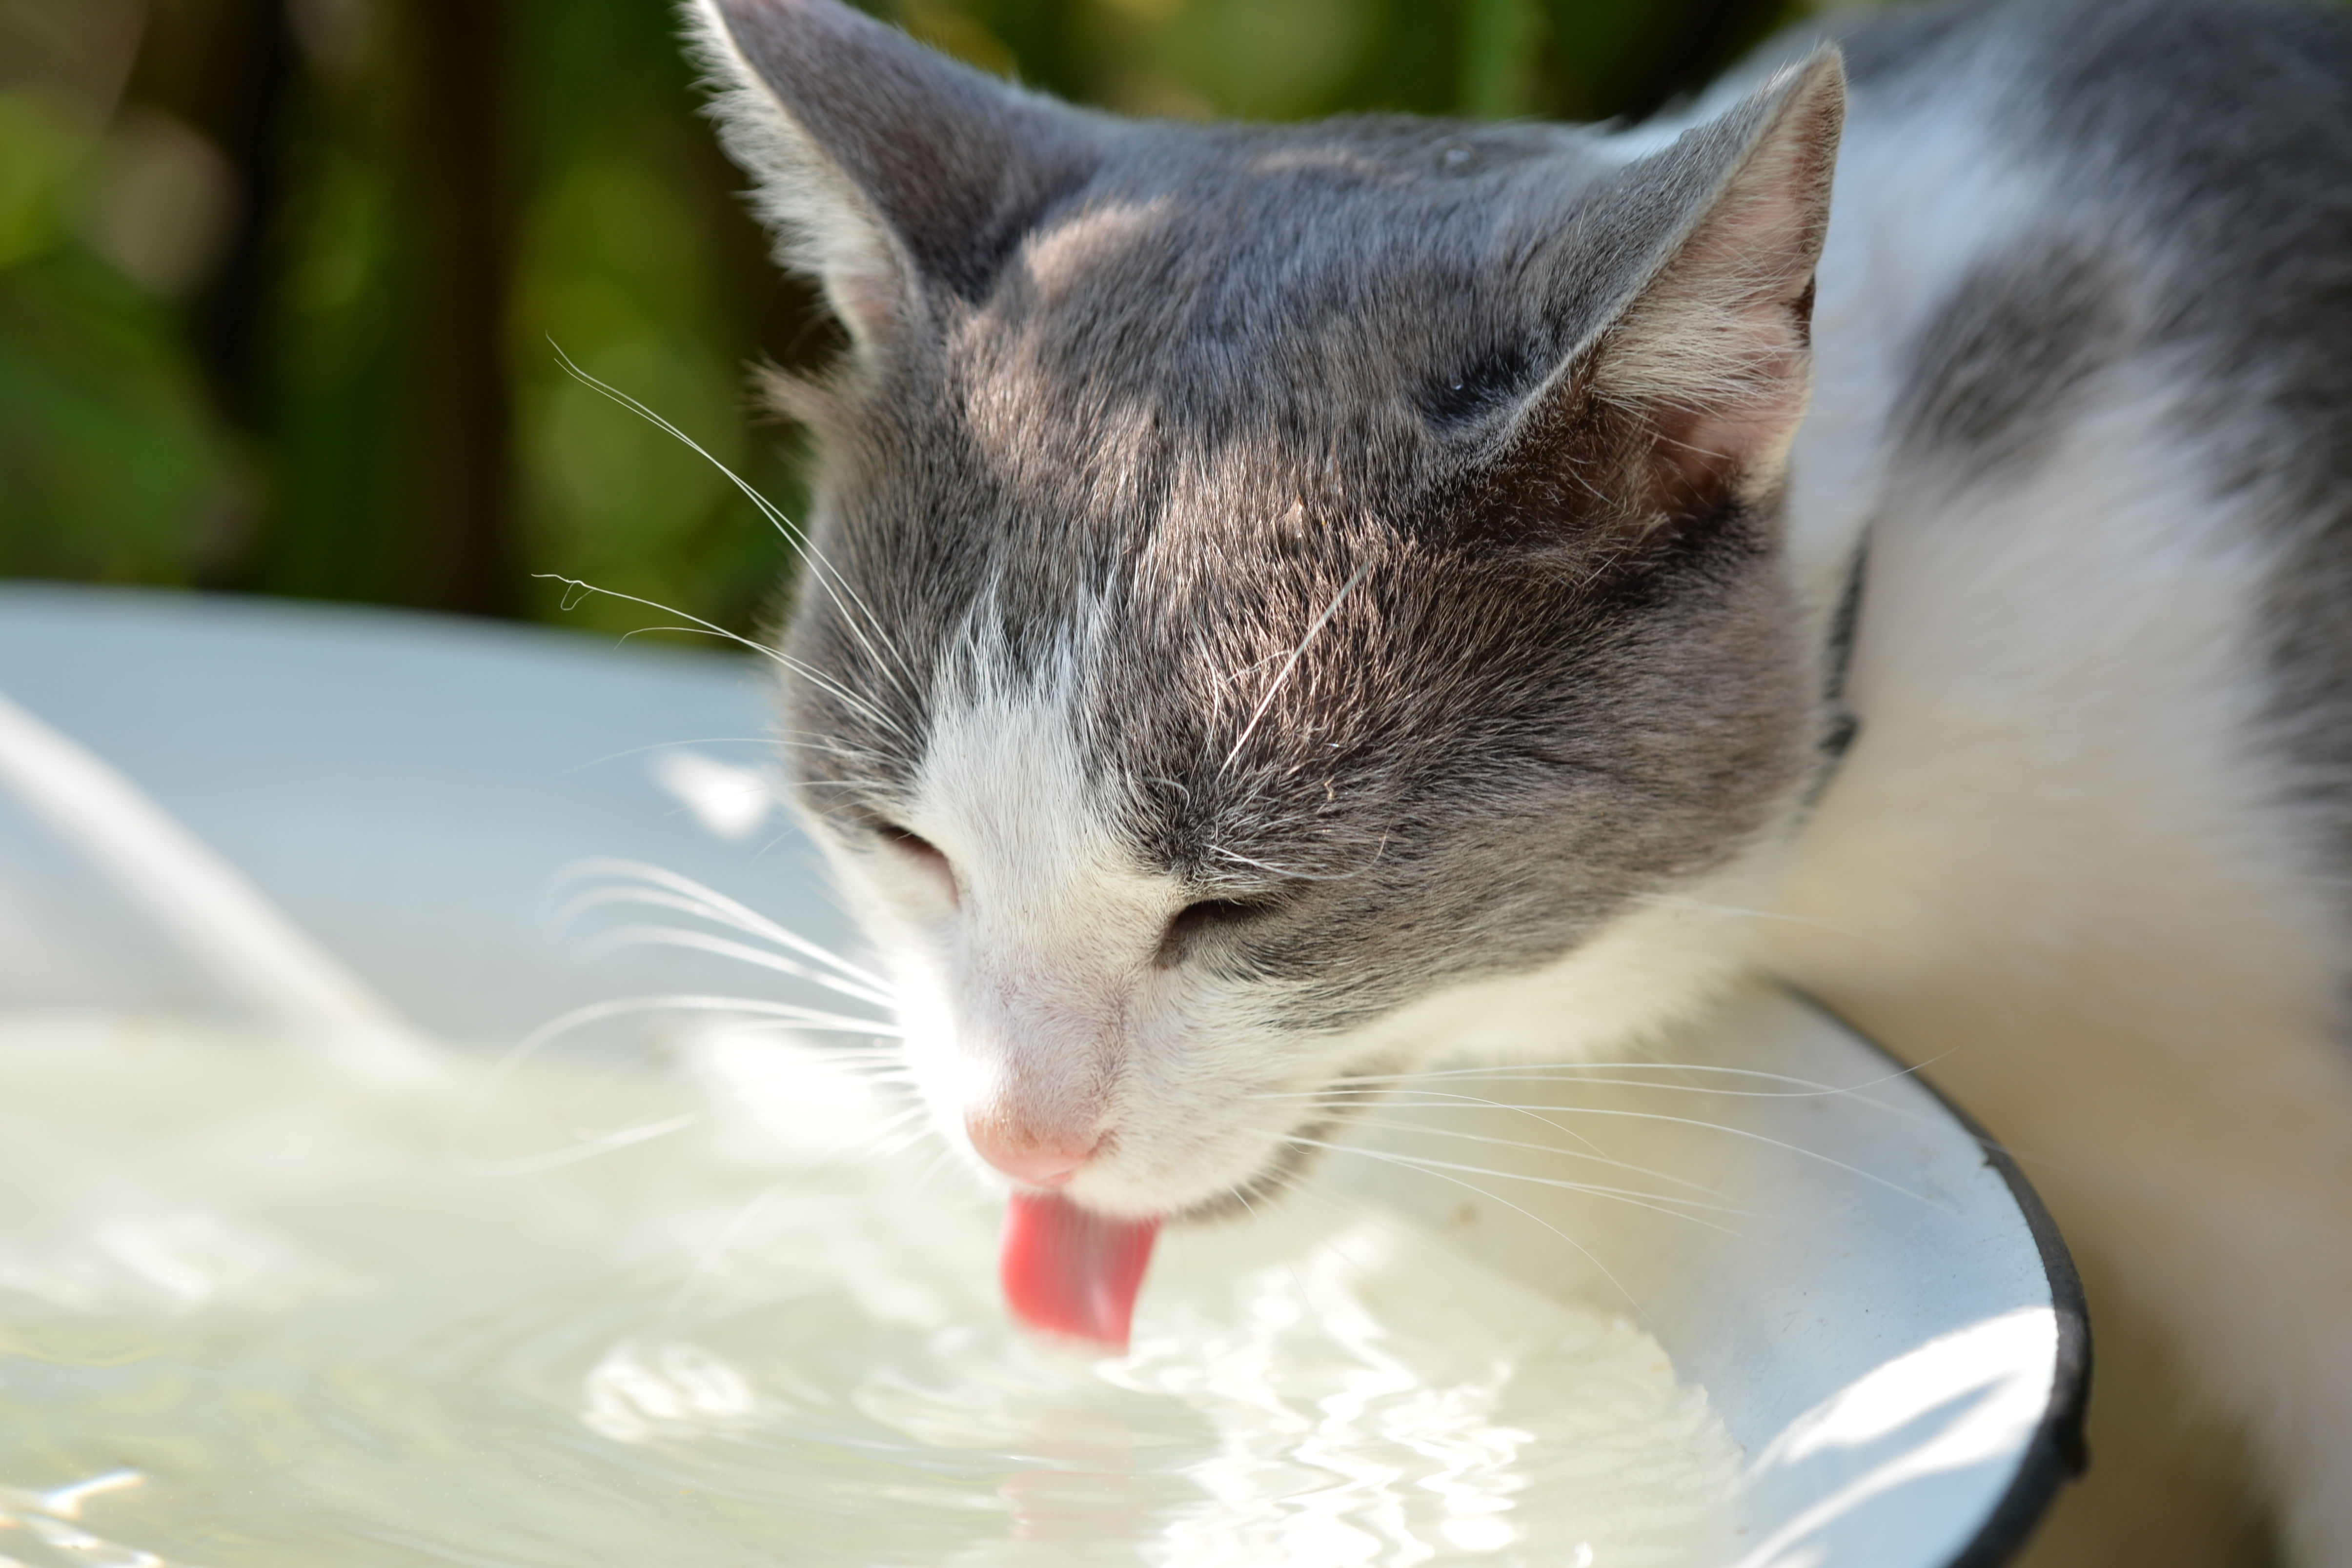 A Cat drinks water out of a bowl